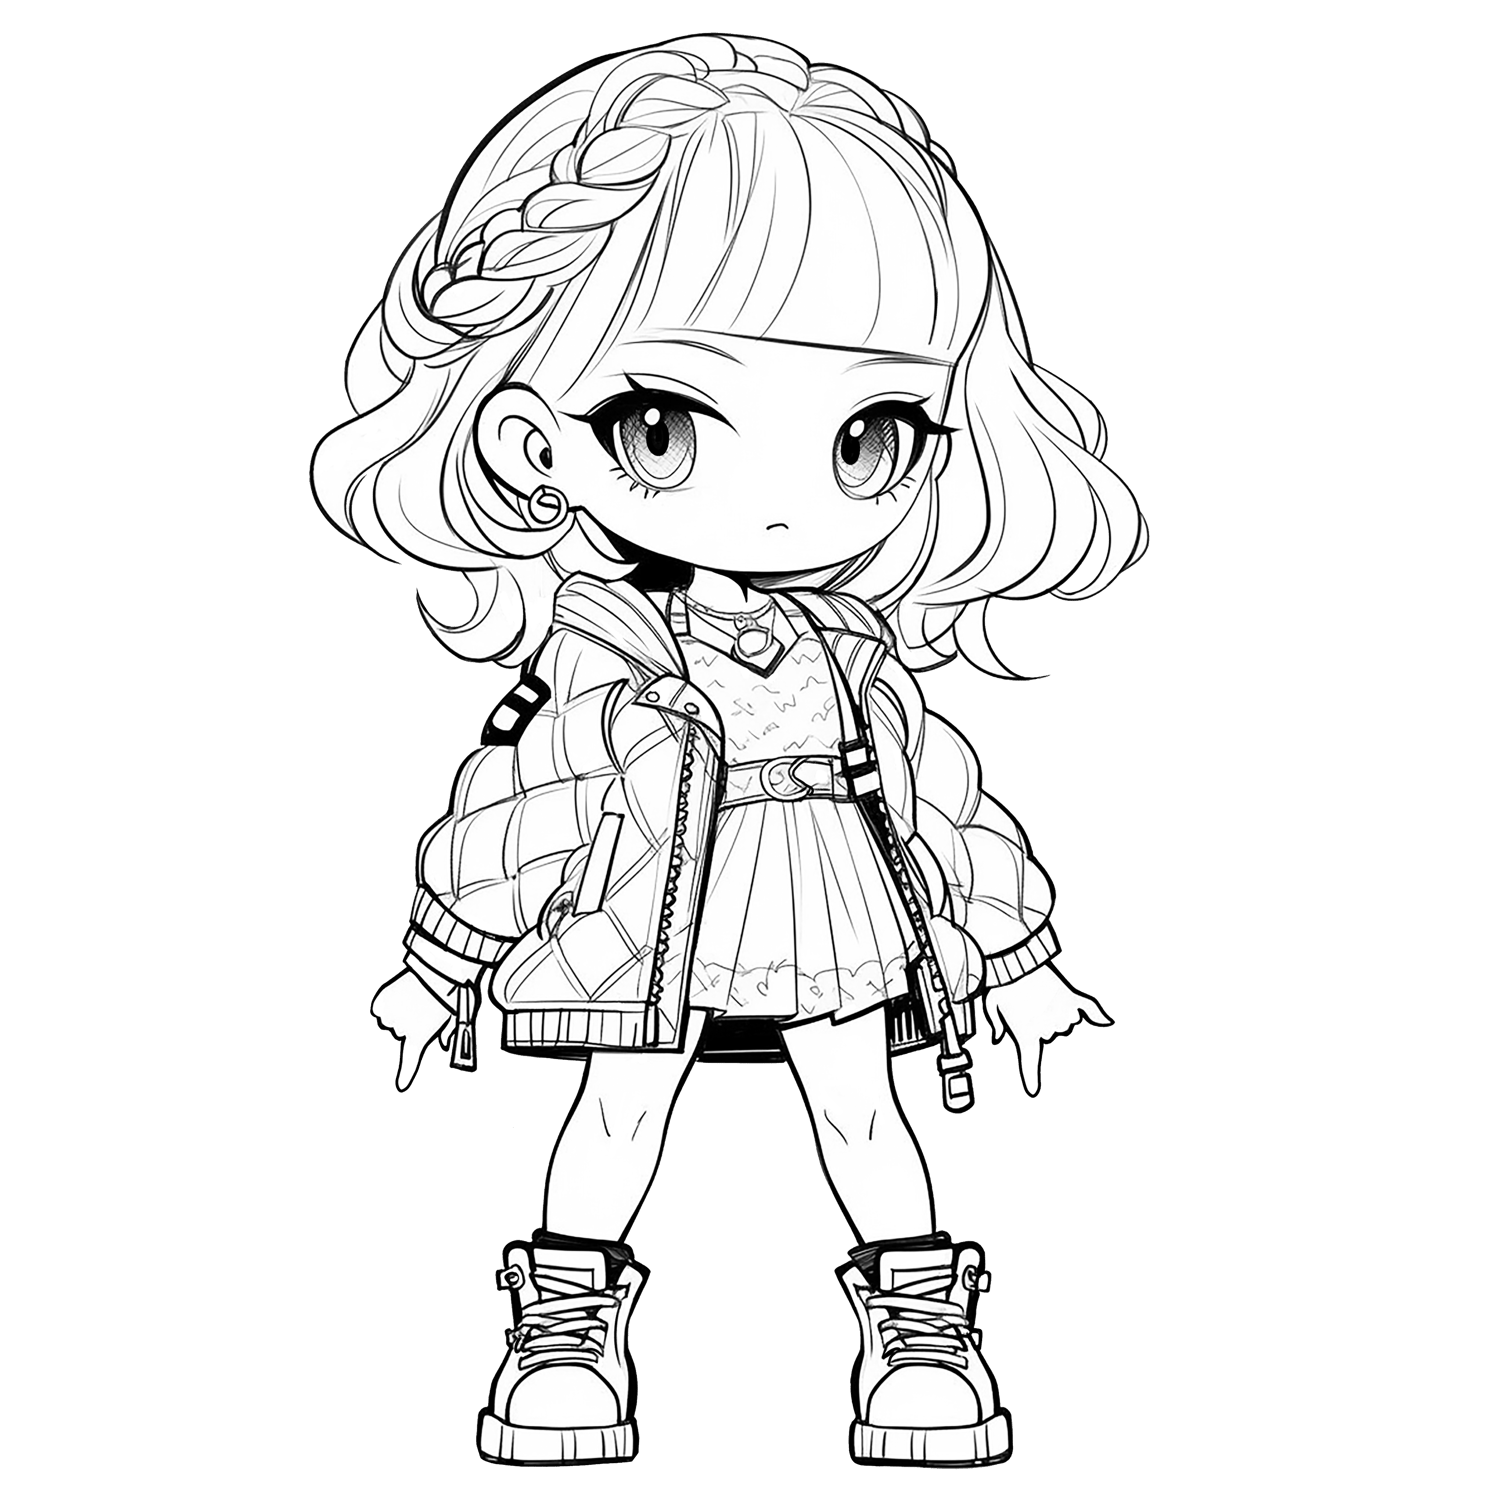 100 Chibi Girls Coloring Pages for Kids Graphic by KDP PRO DESIGN